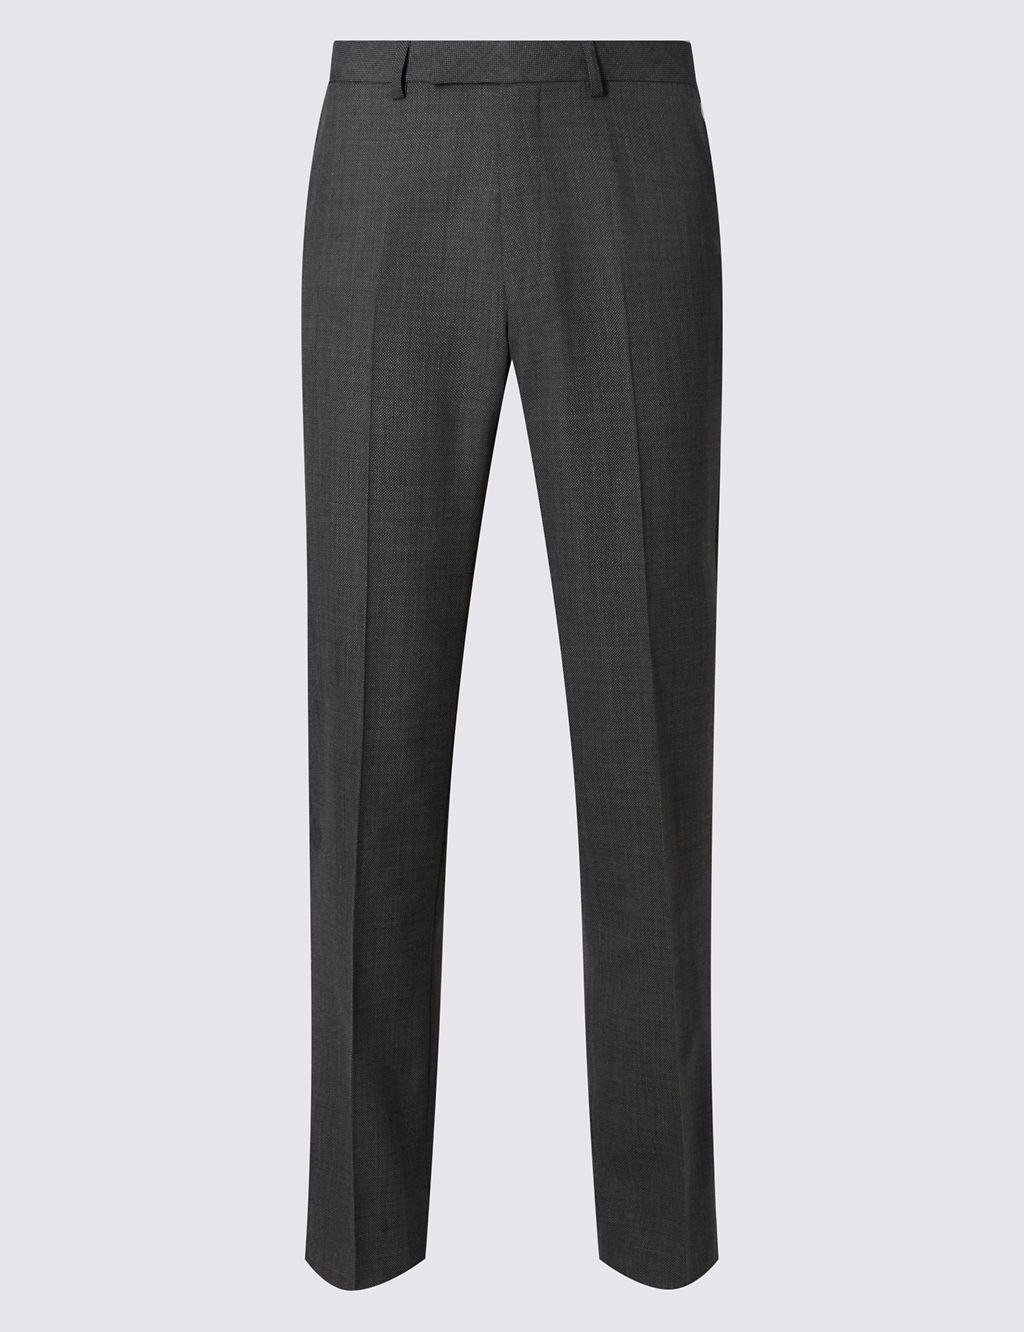 Grey Textured Tailored Fit Trousers 1 of 5